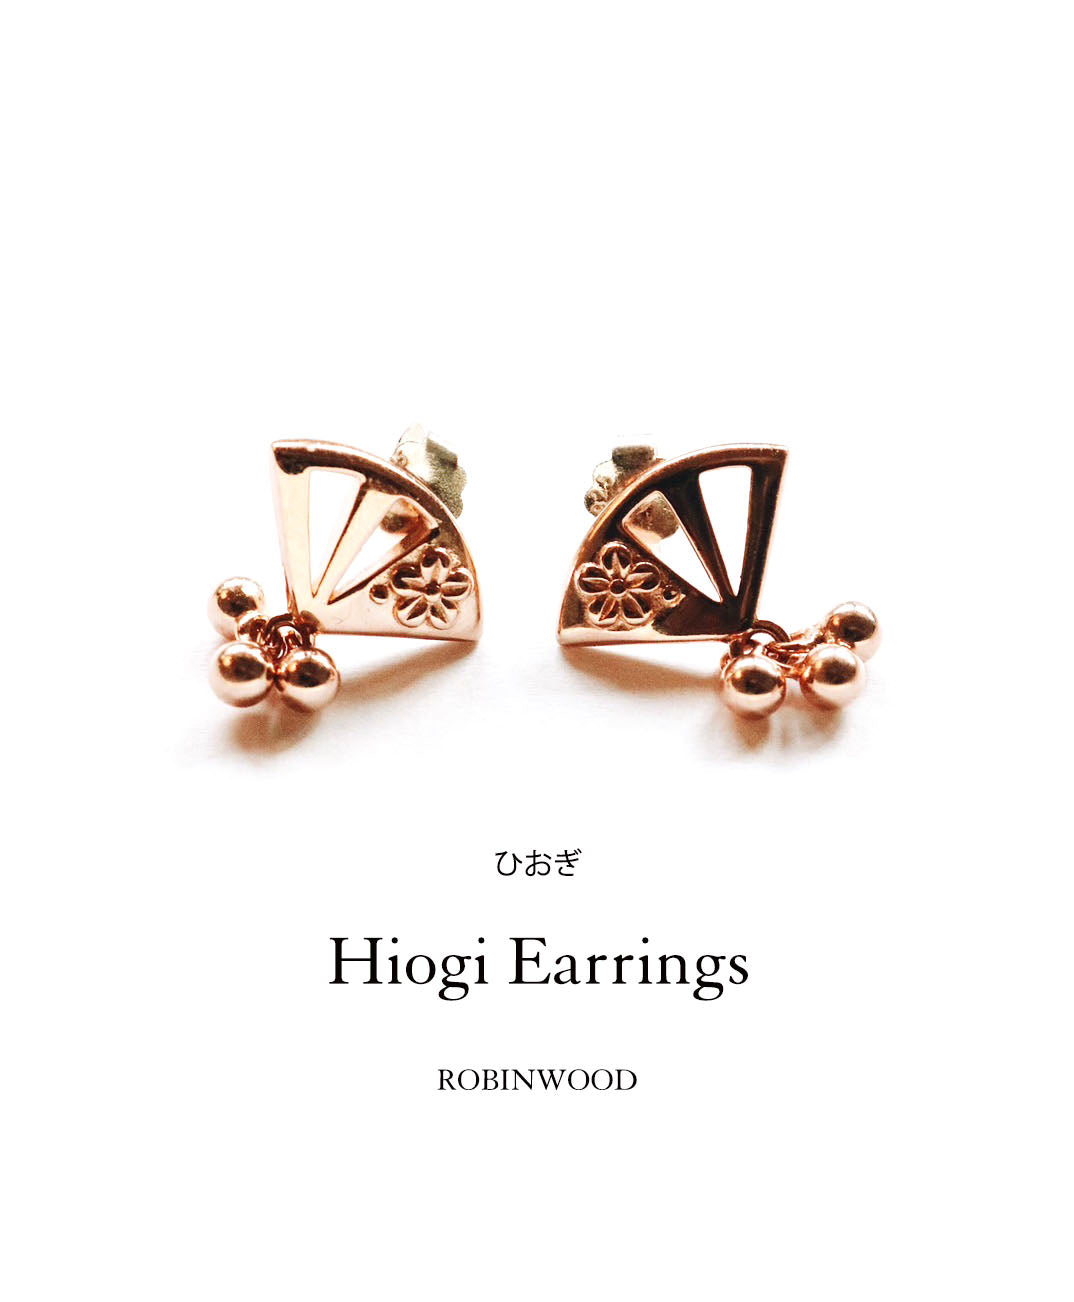 Limited Collection's " Hiogi Japan Earrings ", Robinwood Masterpieces